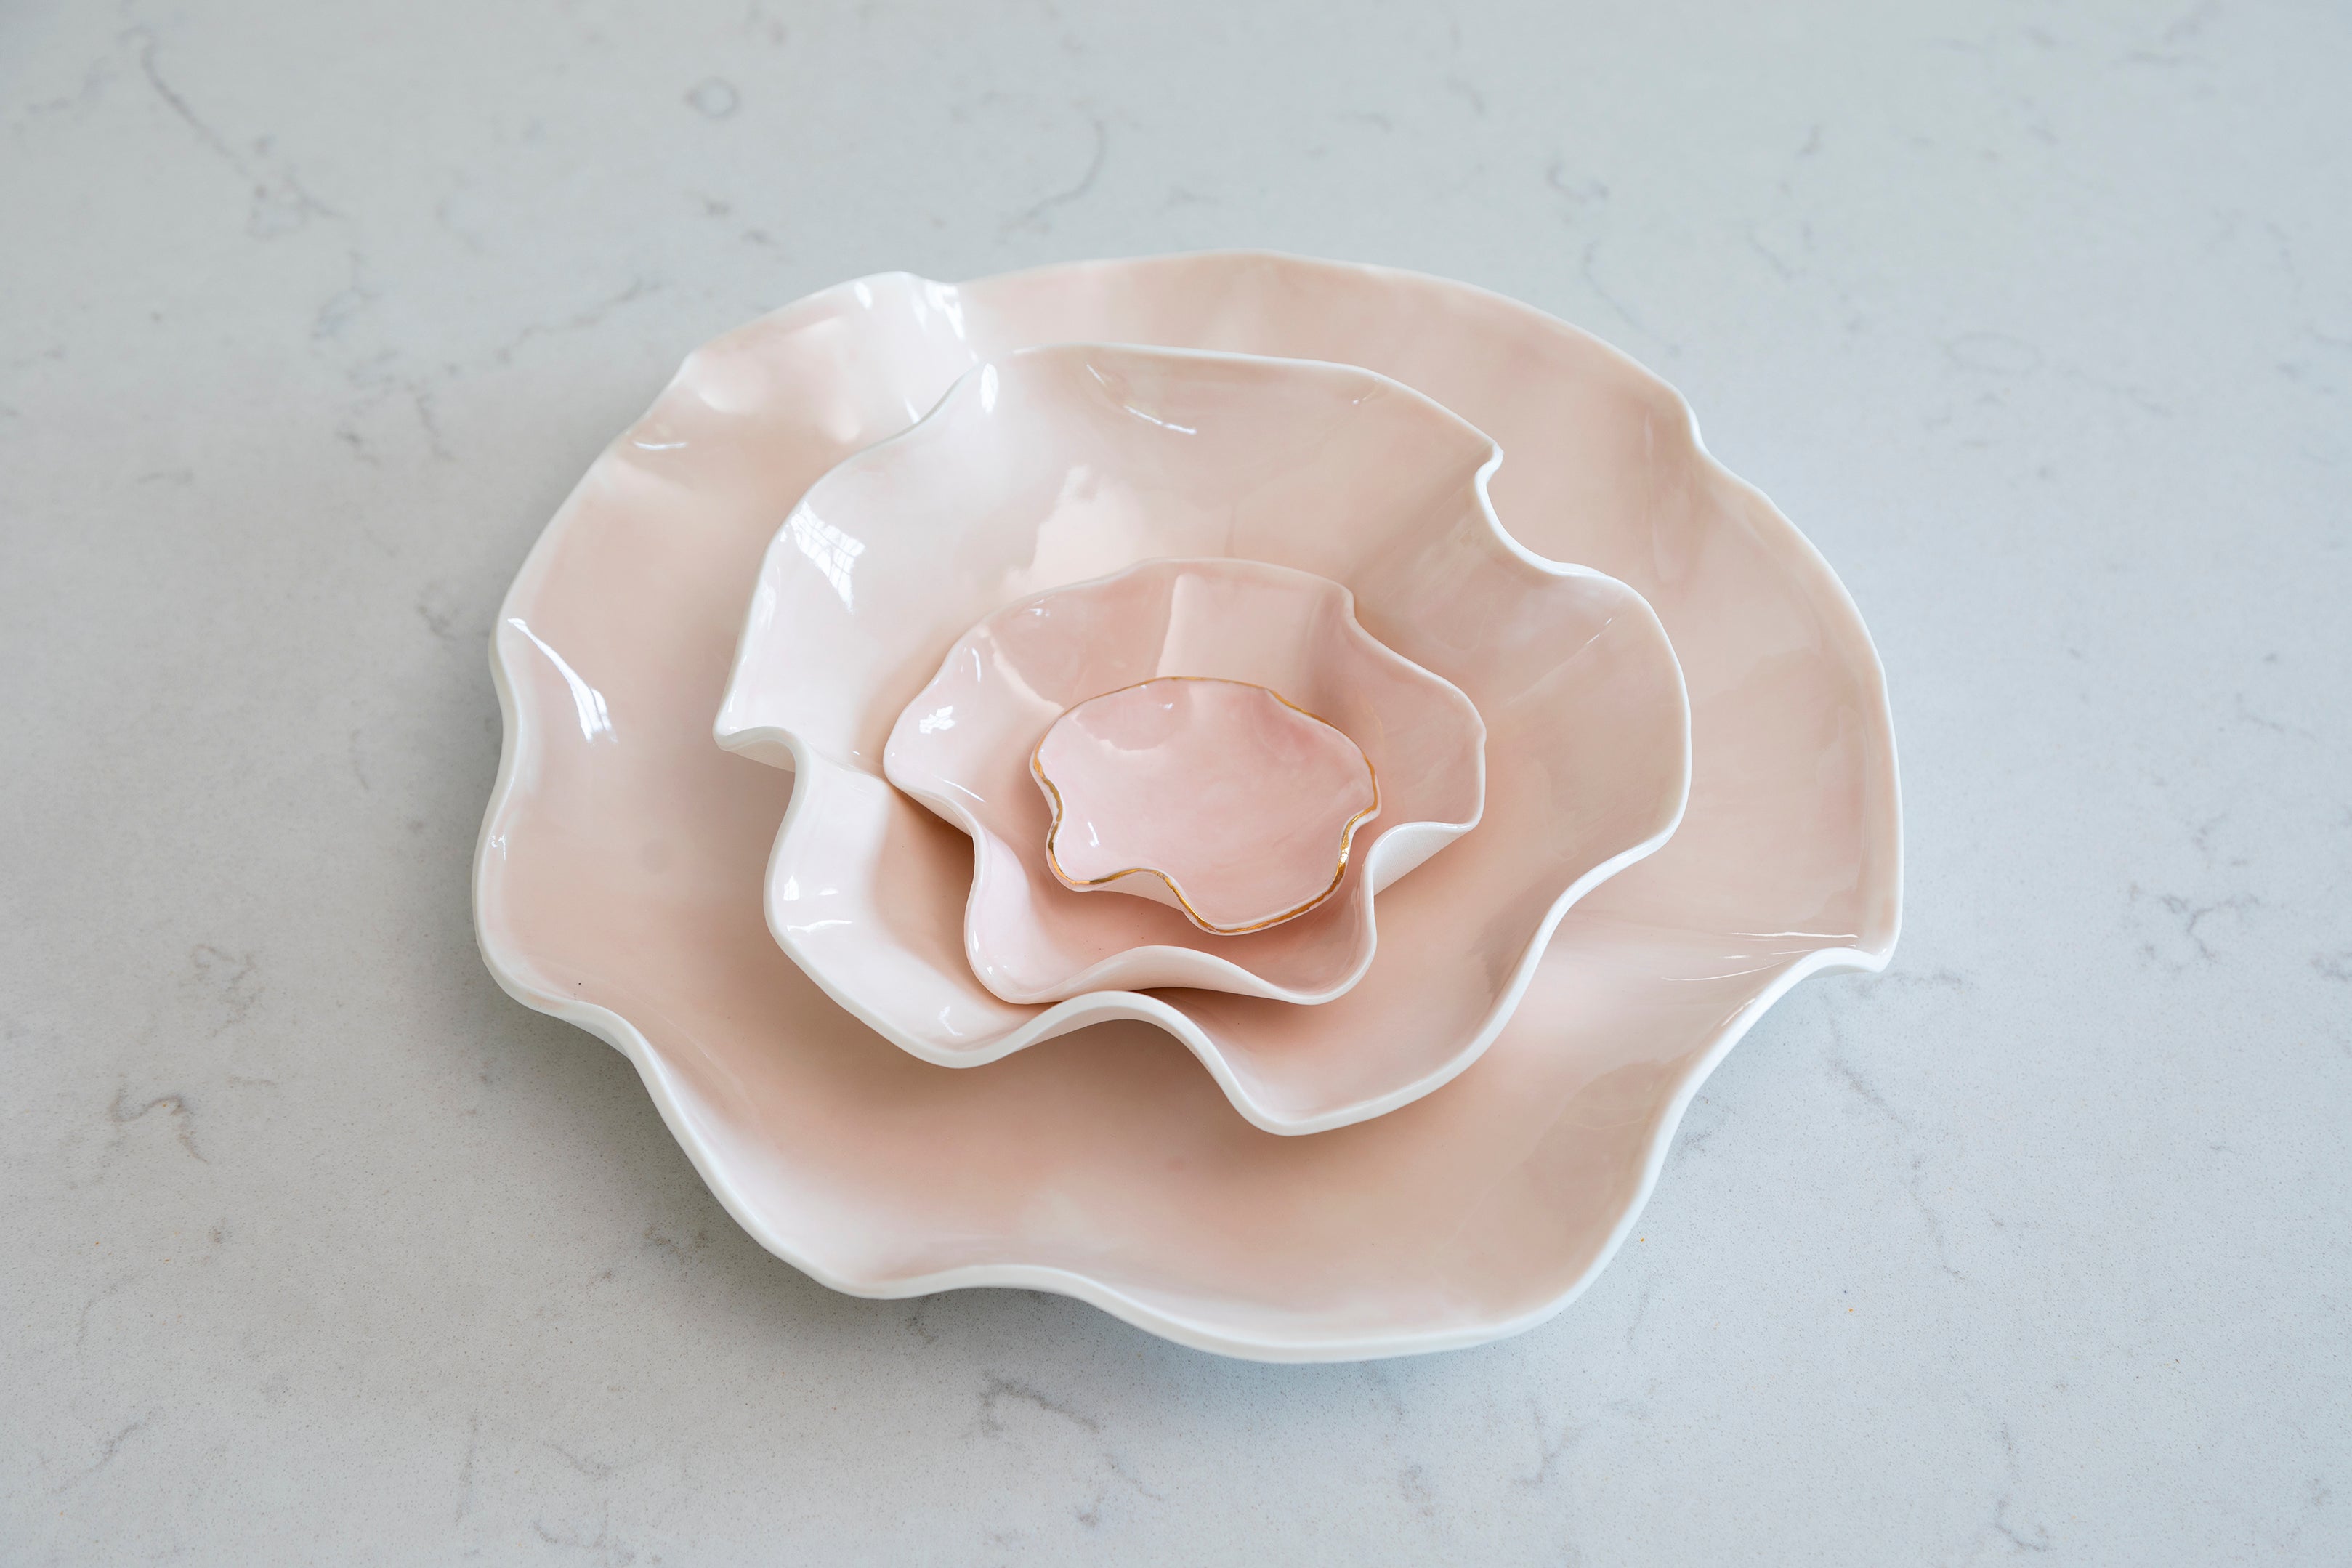 Cluster of pink Joanna Ling wave bowls and trinket dishes